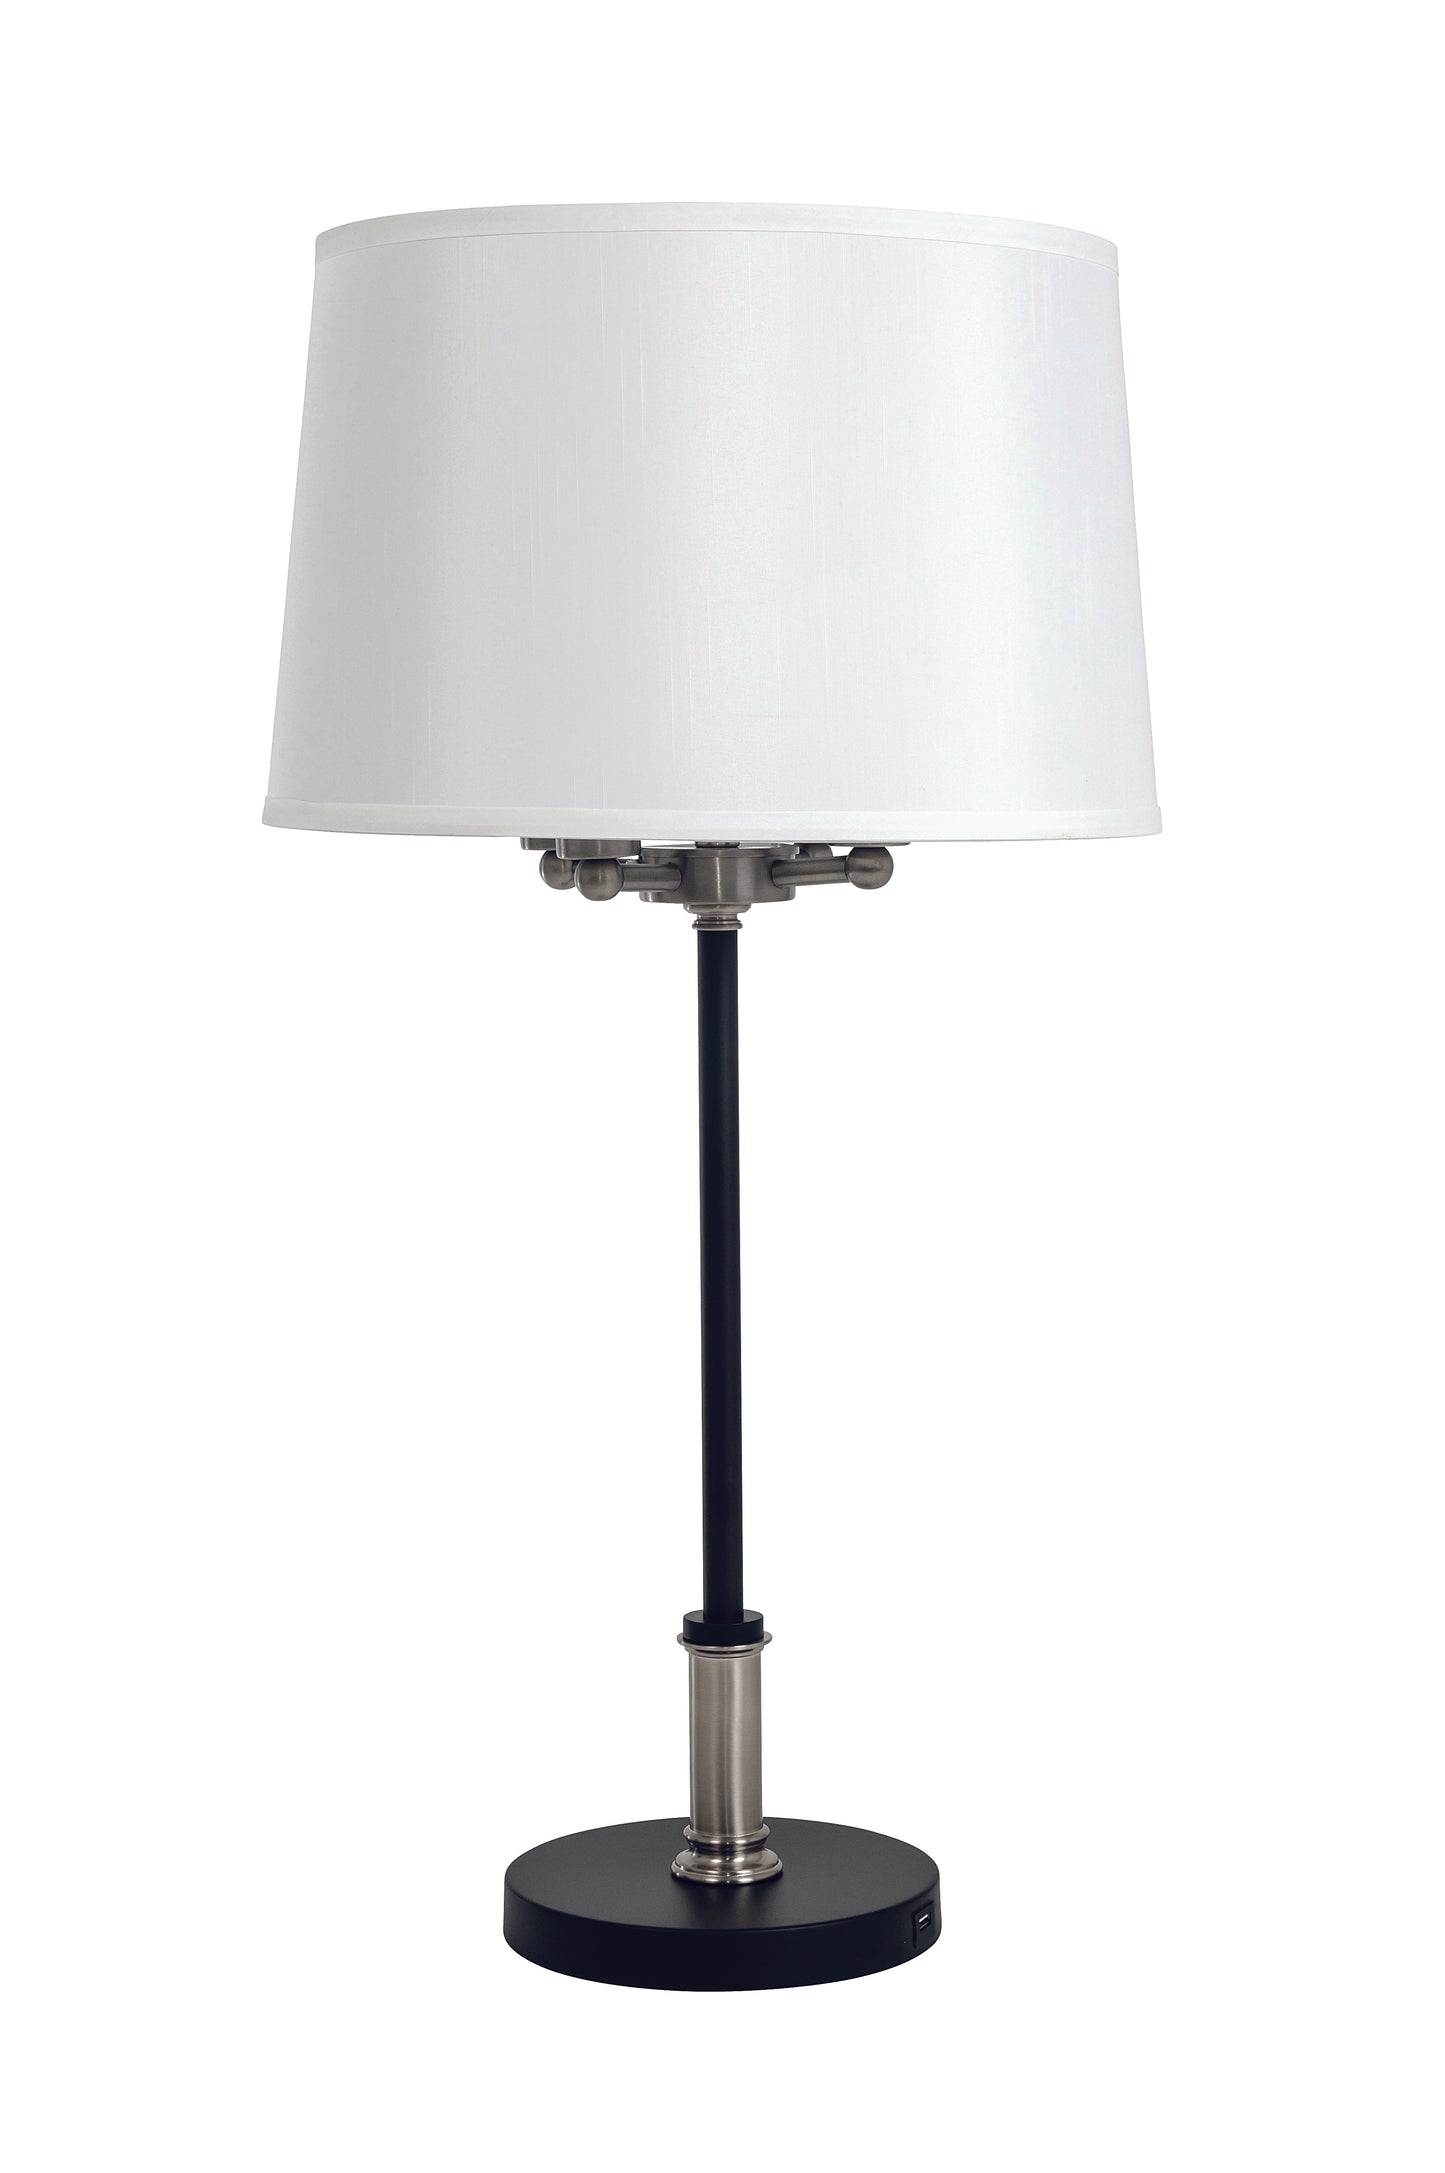 House of Troy Alpine 4 light cluster black/satin nickel table lamp with white silk softback shade A752-BLK/SN